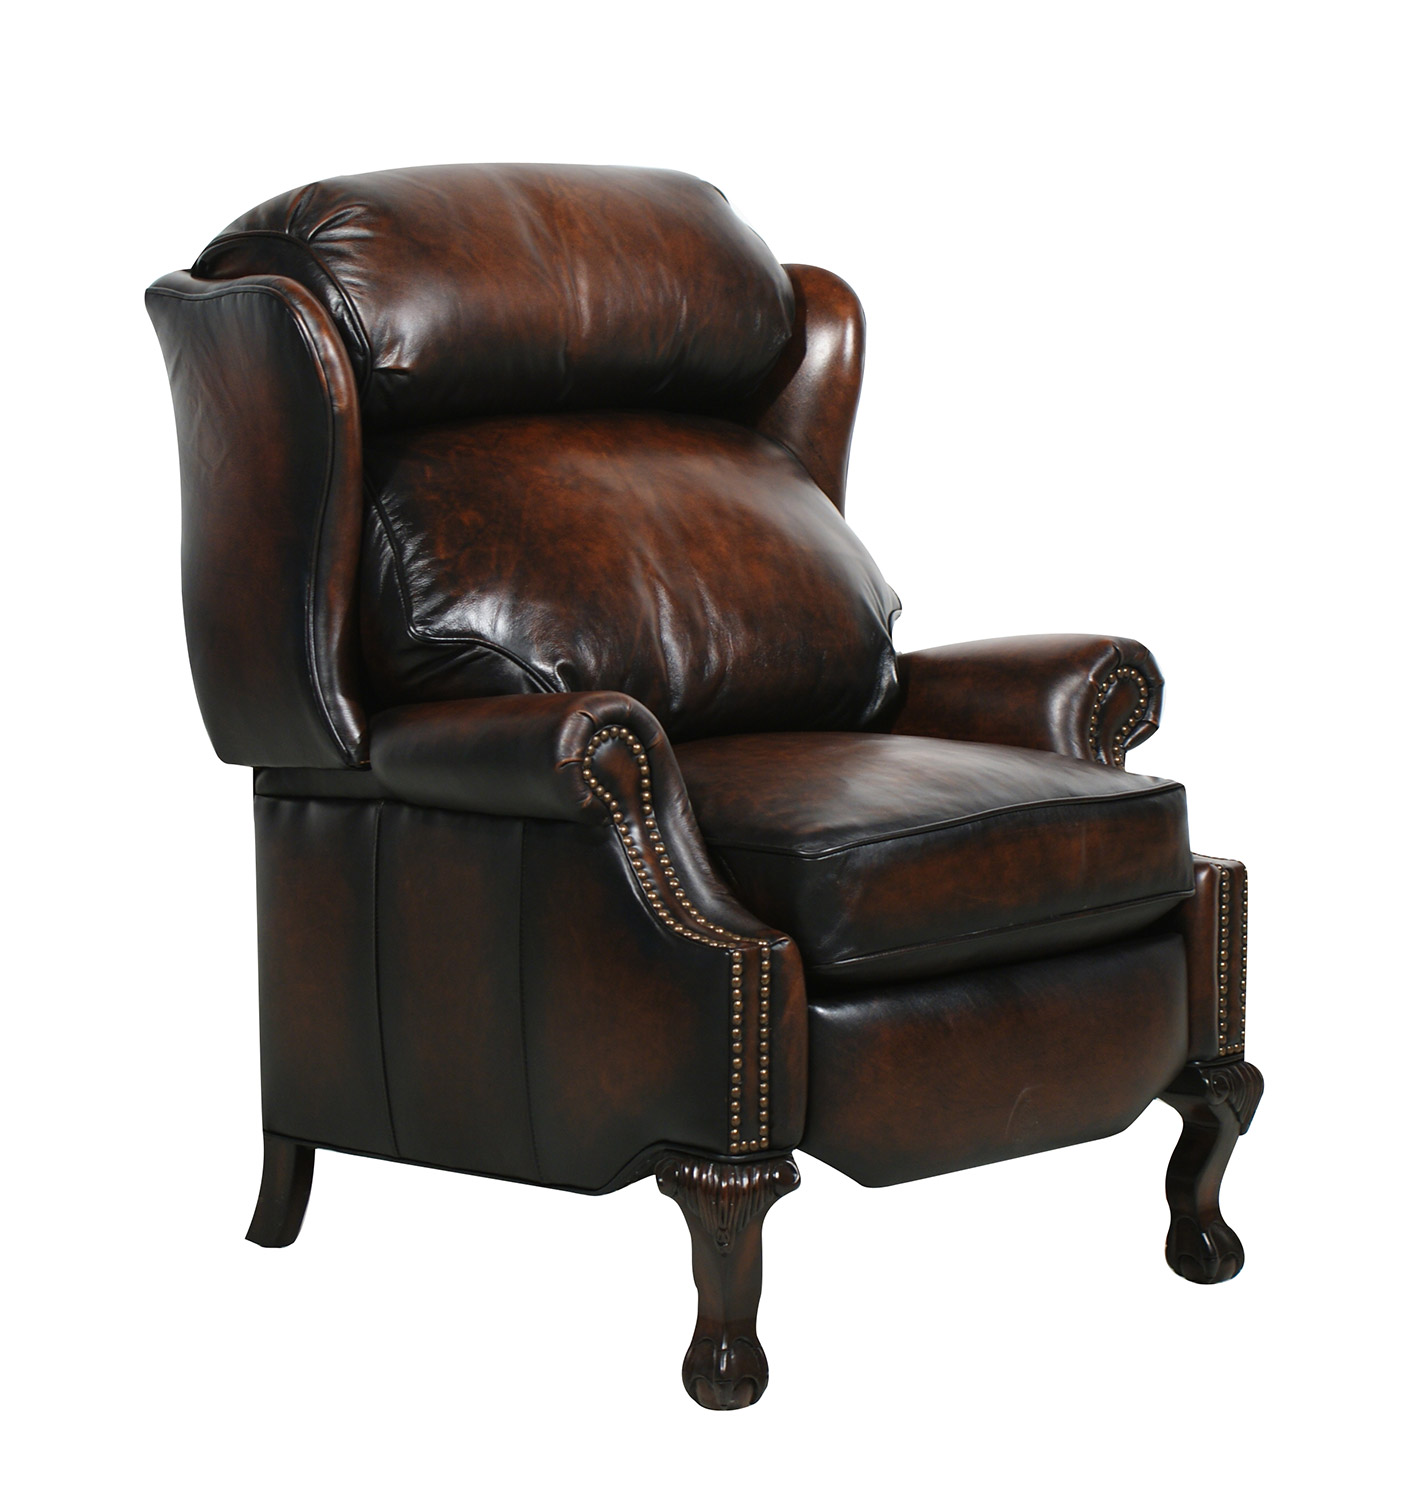 Barcalounger Danbury ll Vintage reserve Leather Recliner - Coffee